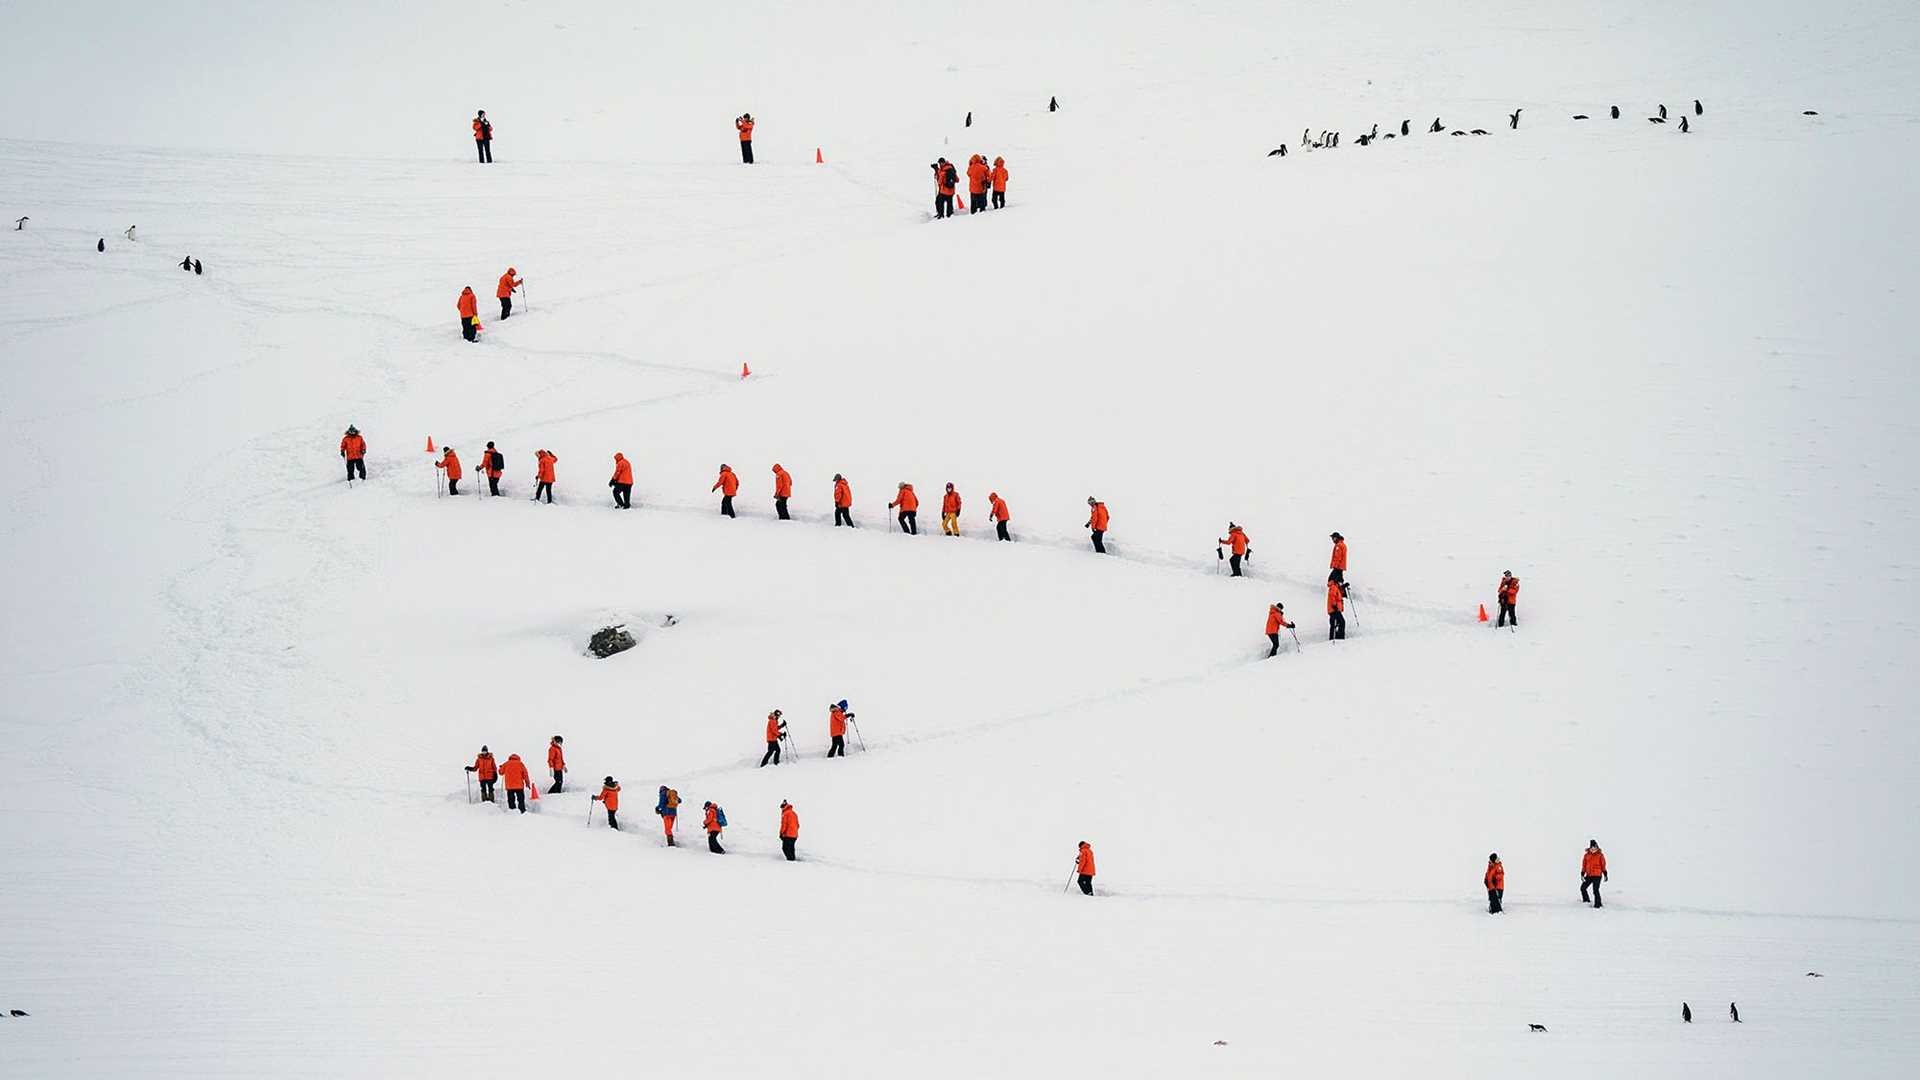 hikers in red parkas zigzagging up a snowy hill